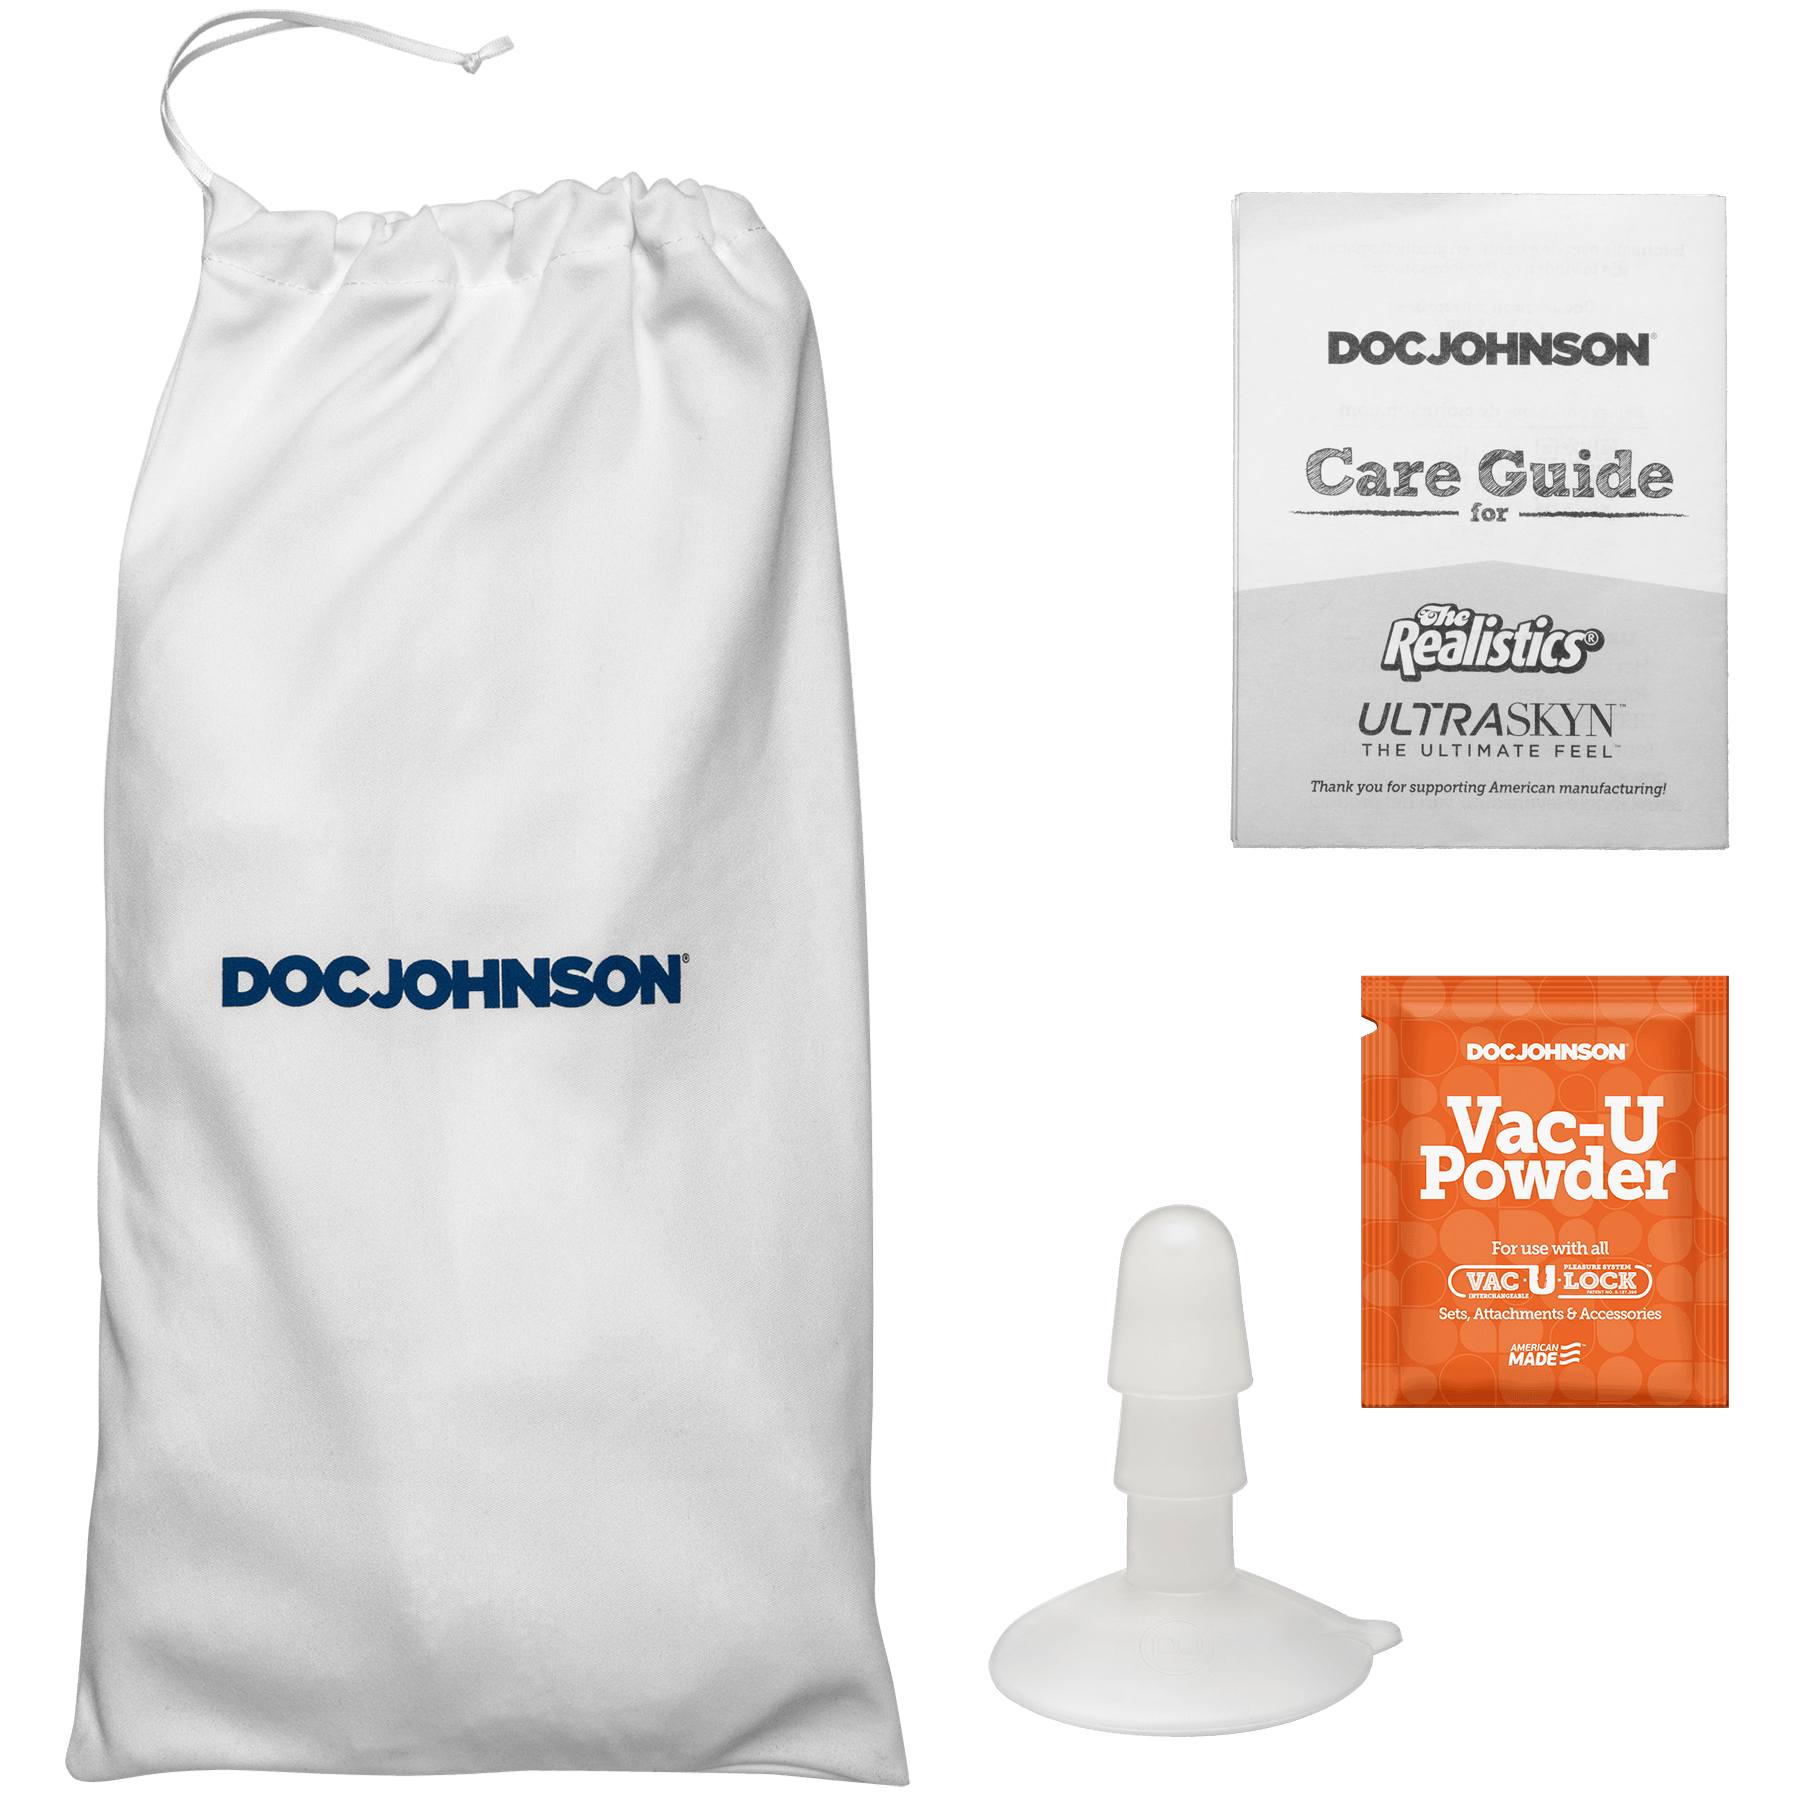 Doc Johnson Signature Cocks Chad White 8.5 Cock - Buy At Luxury Toy X - Free 3-Day Shipping